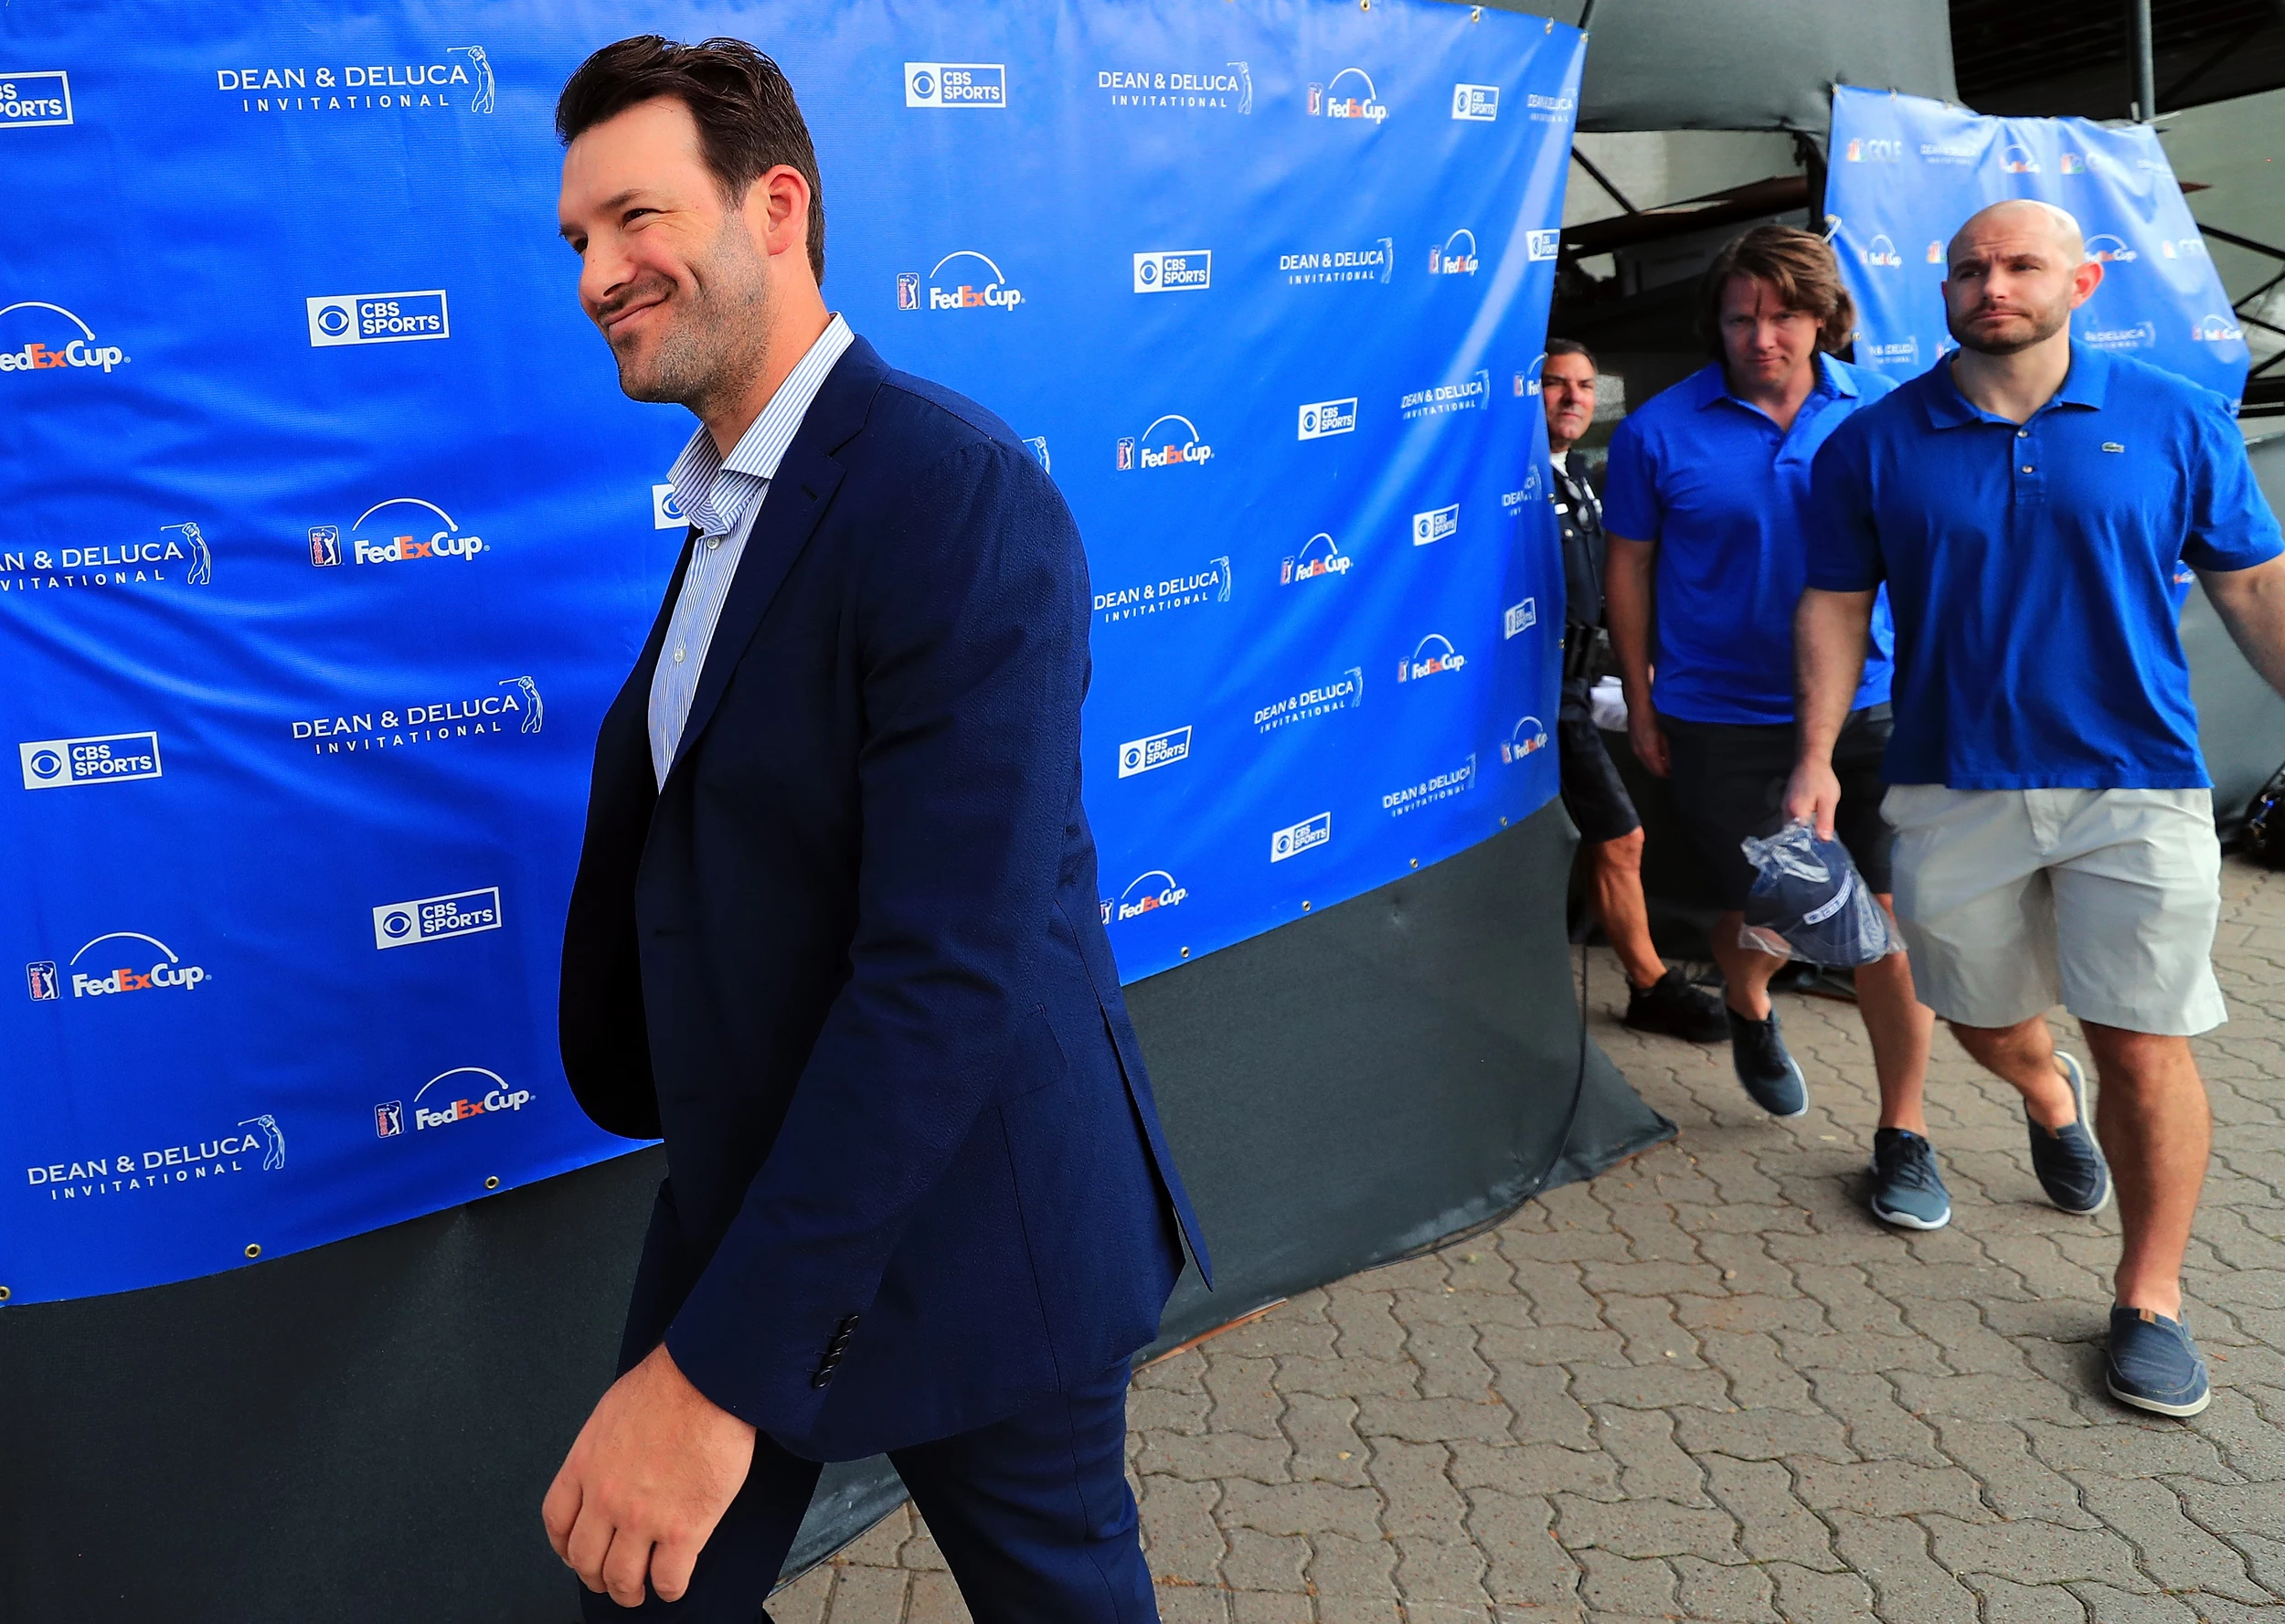 Tony Romo begins another rookie season, this one as a CBS